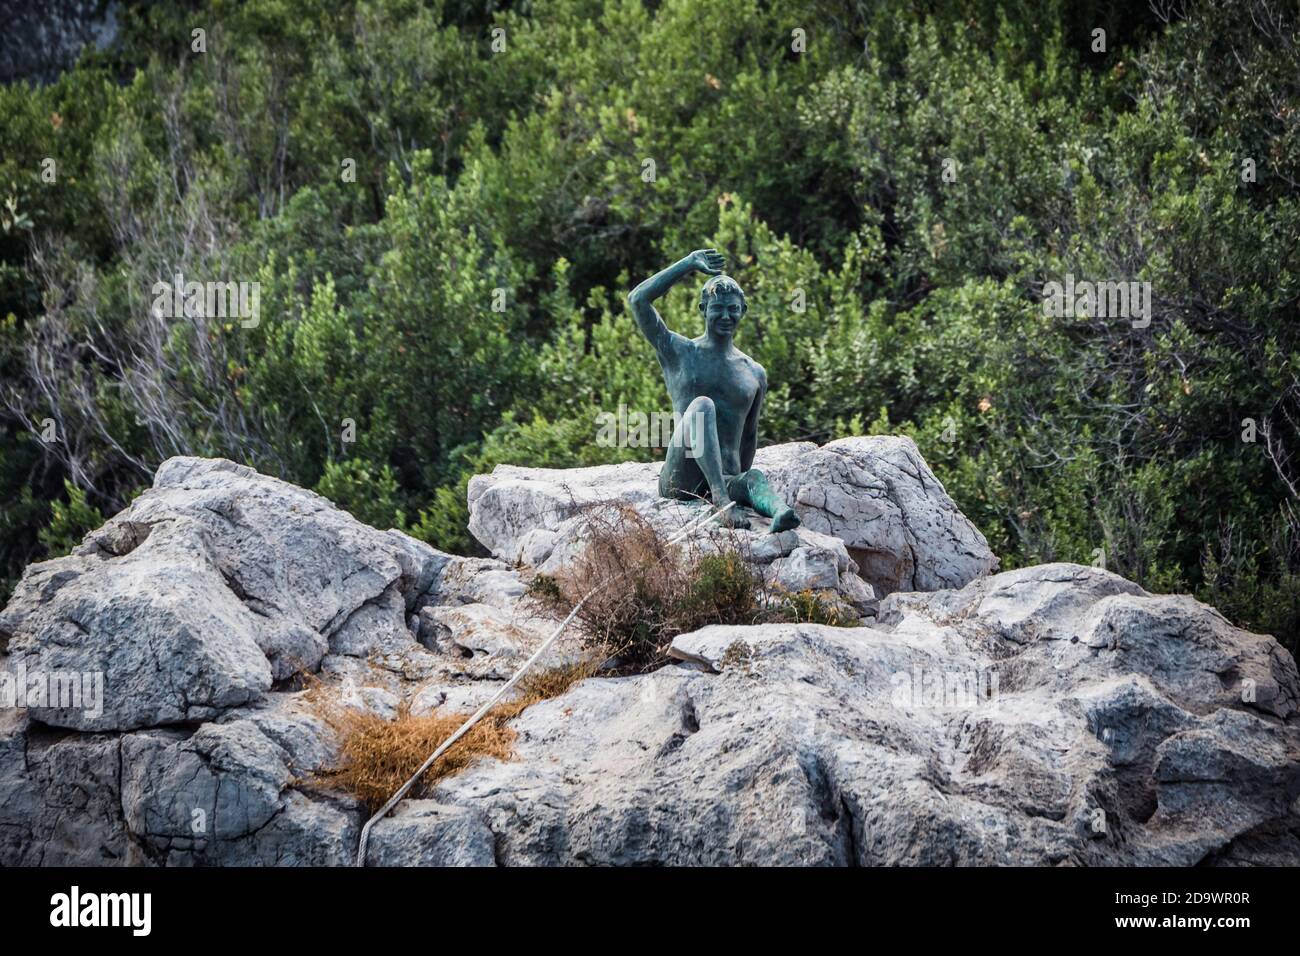 Capri, Italy - August 27 2020: Gennarino Scugnizzo Statue of a Young Boy Greeting the Visitors on a Rock Stock Photo